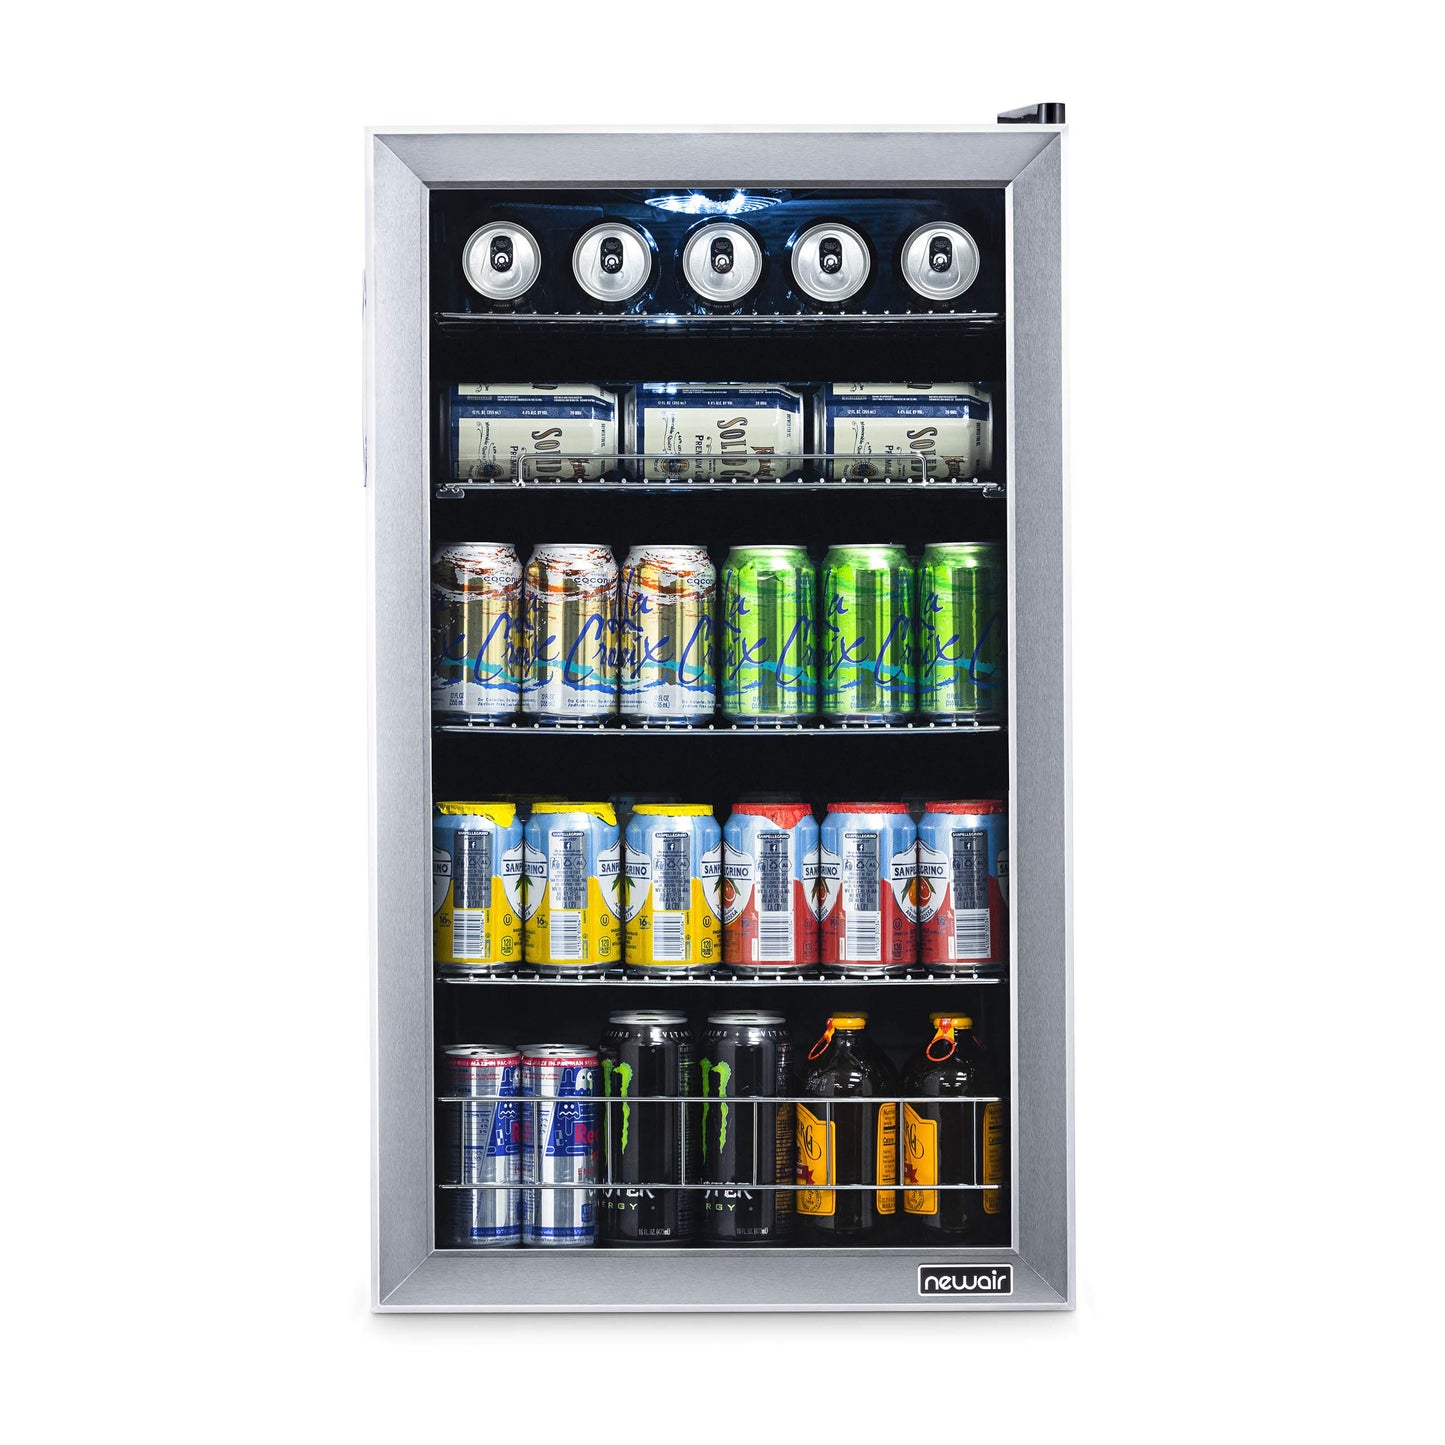 NewAir Beverage Refrigerator And Cooler, Free Standing Glass Door Refrigerator Holds Up To 126 Cans, Cools Down To 37 Degrees Perfect Organizer For Beer, Wine, Soda, Pop, And Cooler Drinks